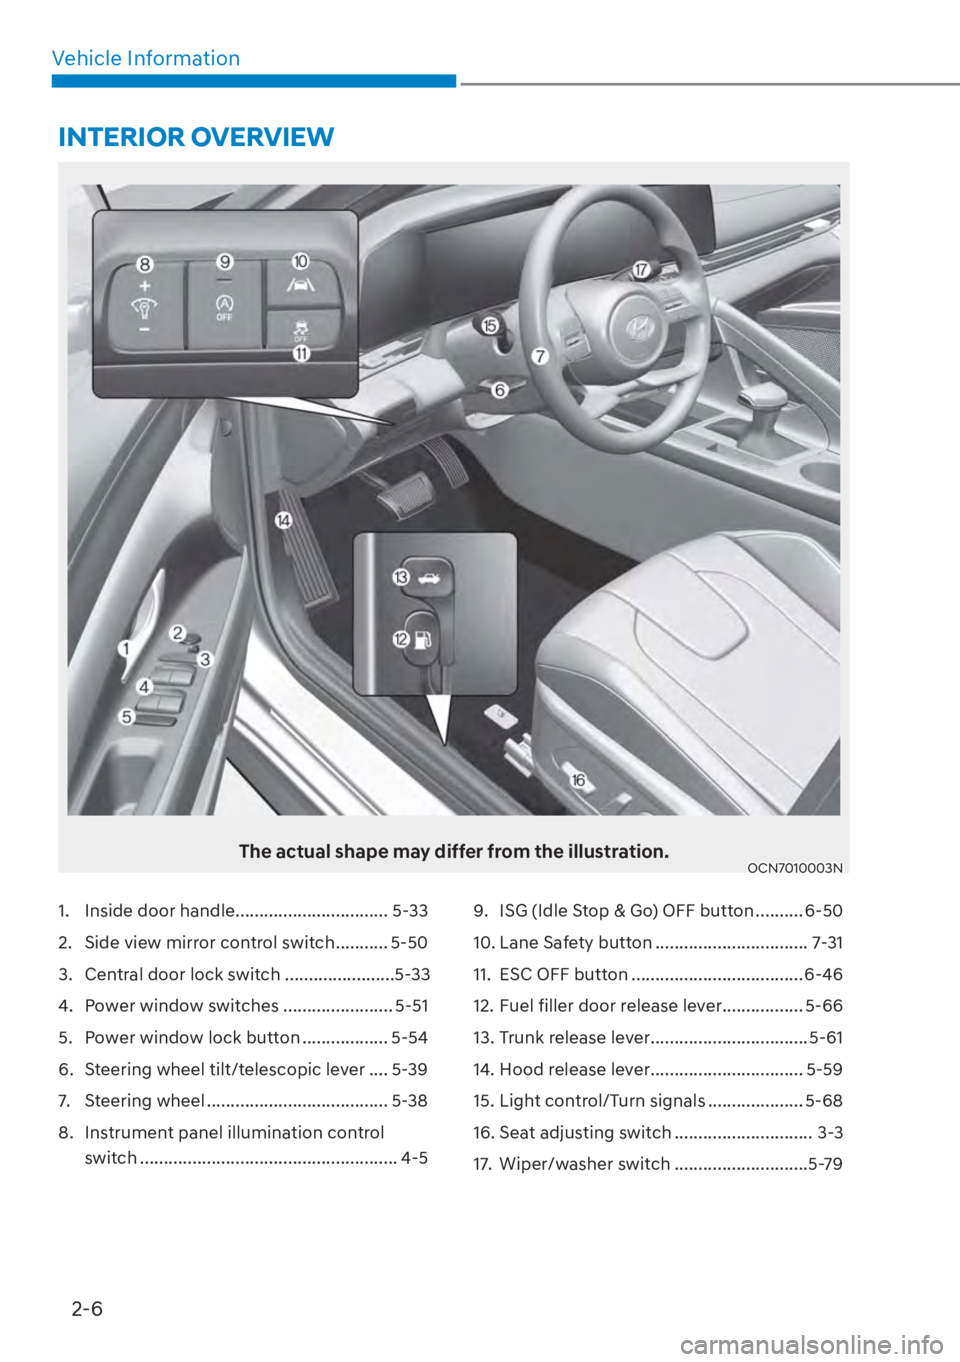 HYUNDAI ELANTRA 2023  Owners Manual 2-6
Vehicle Information
The actual shape may differ from the illustration.OCN7010003N
1.  Inside door handle ................................ 5-33
2.  Side view mirror control switch ........... 5-50
